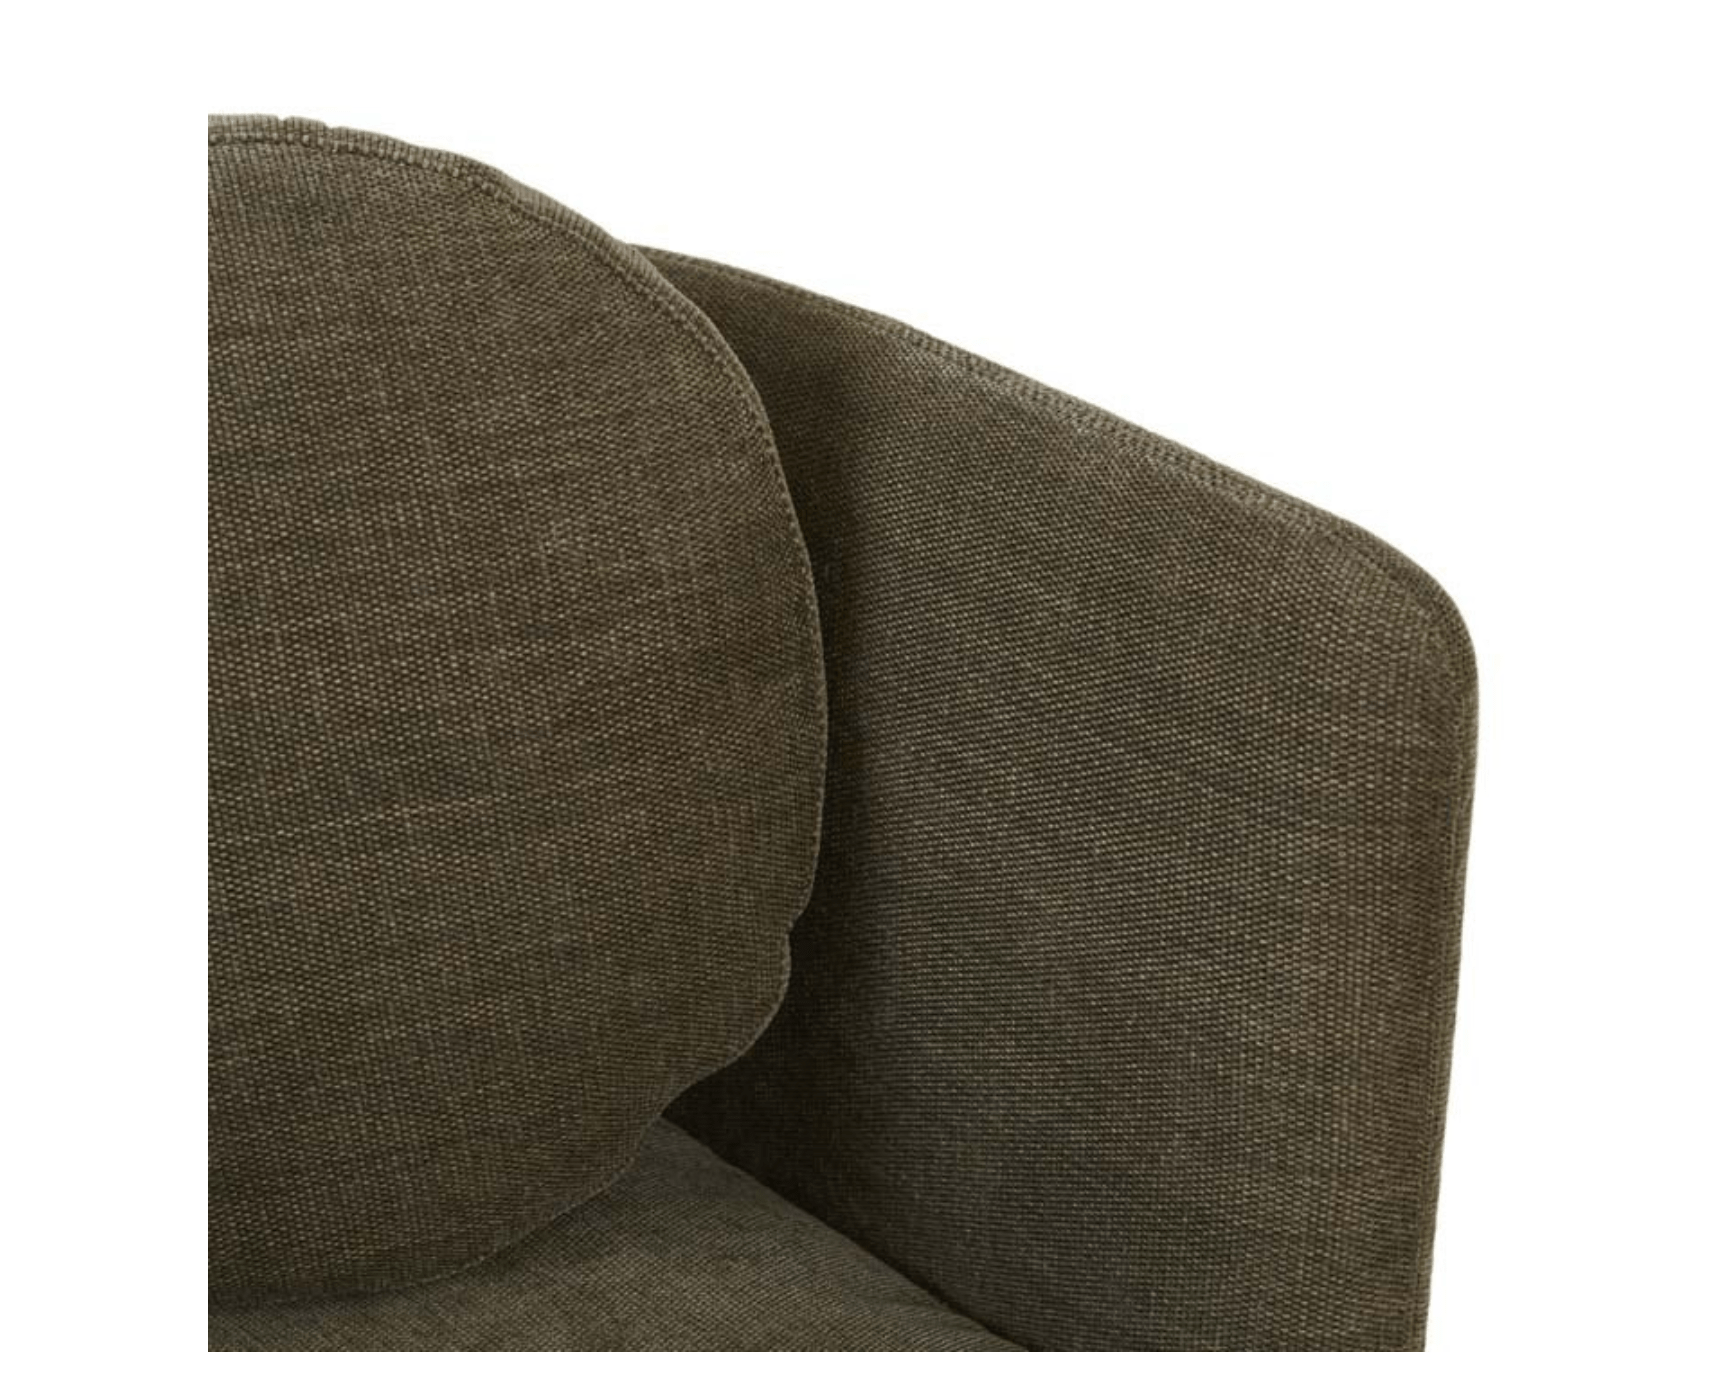 Globe West Occasional Chairs Globe West Hugo Bow Occasional Chair, Copeland Olive (7586540093689)